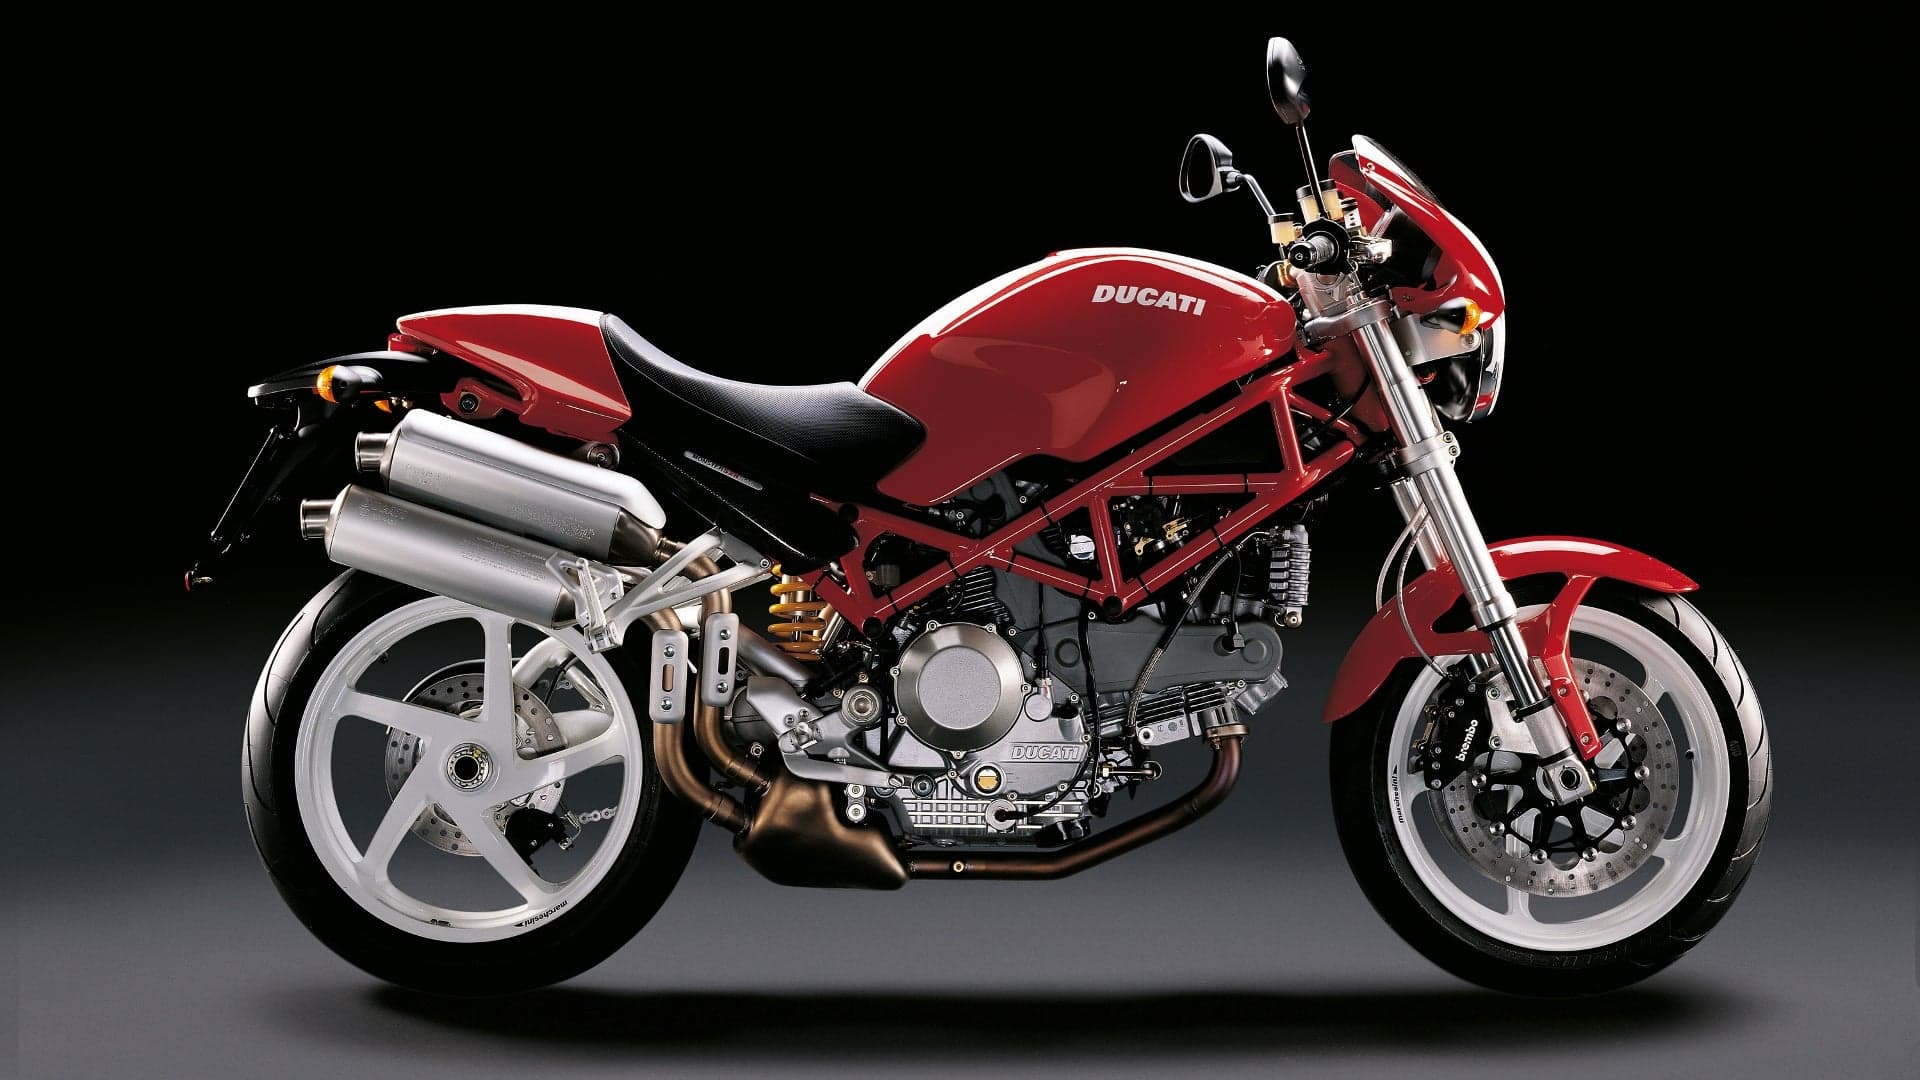 A Brief Visual History of the Ducati Monster